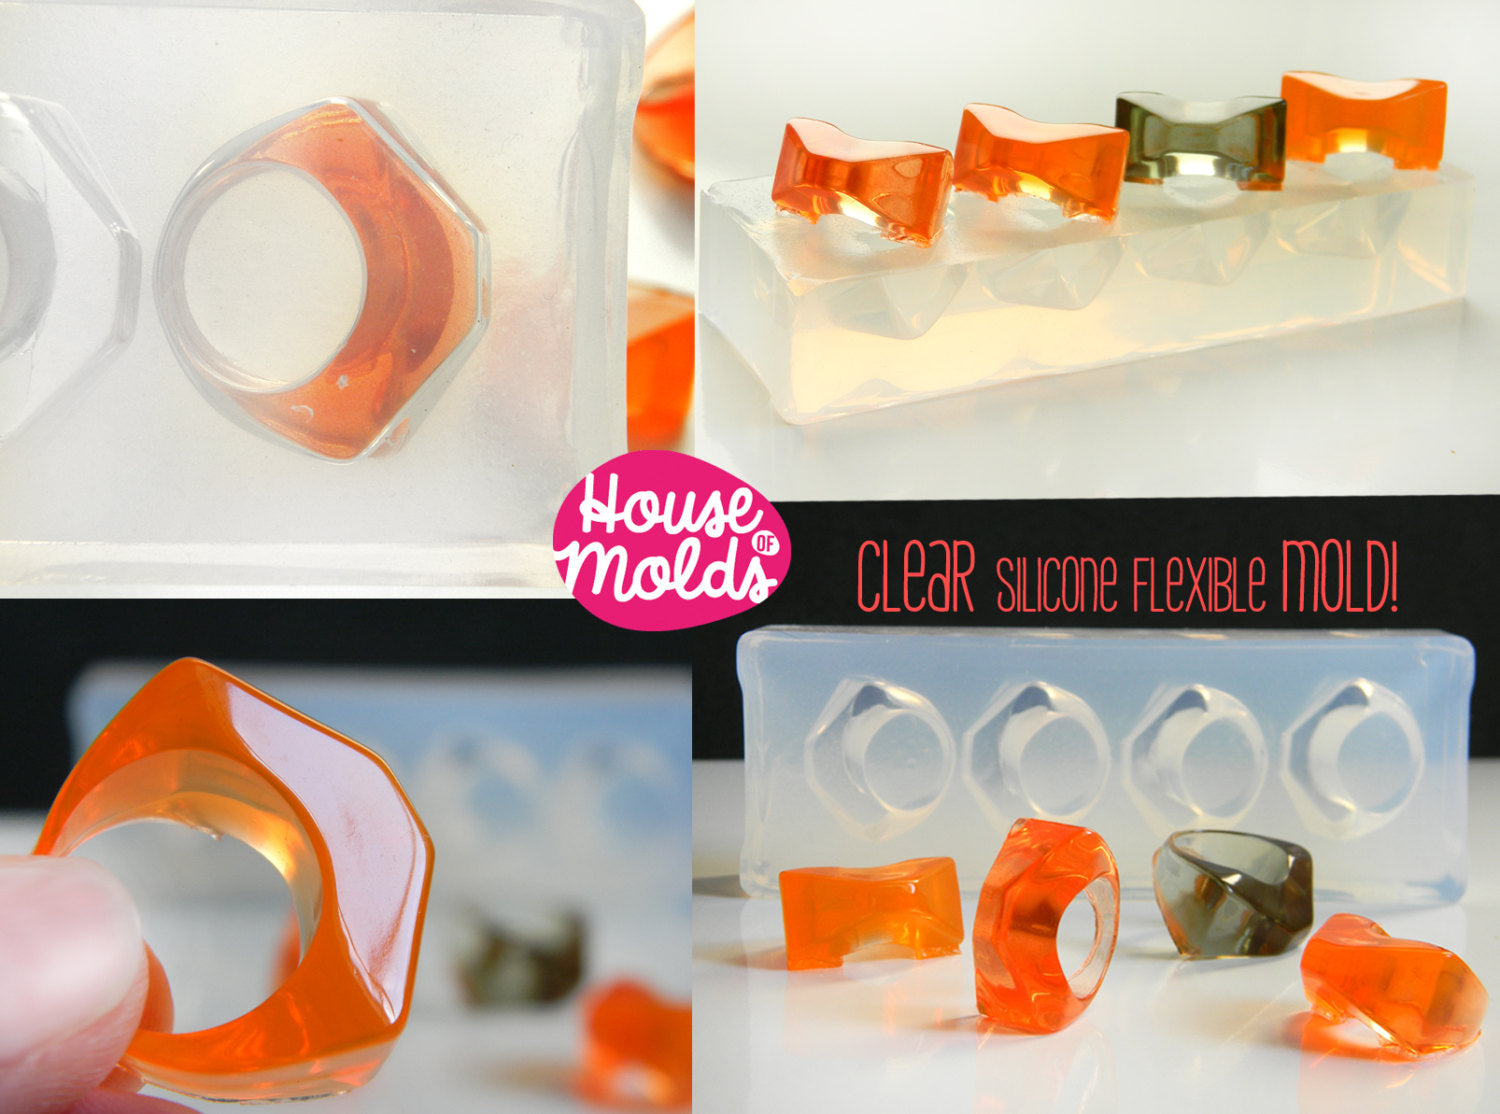 Clear Multi Size Oval Bubble Rings- Clear Mold to make 4 size